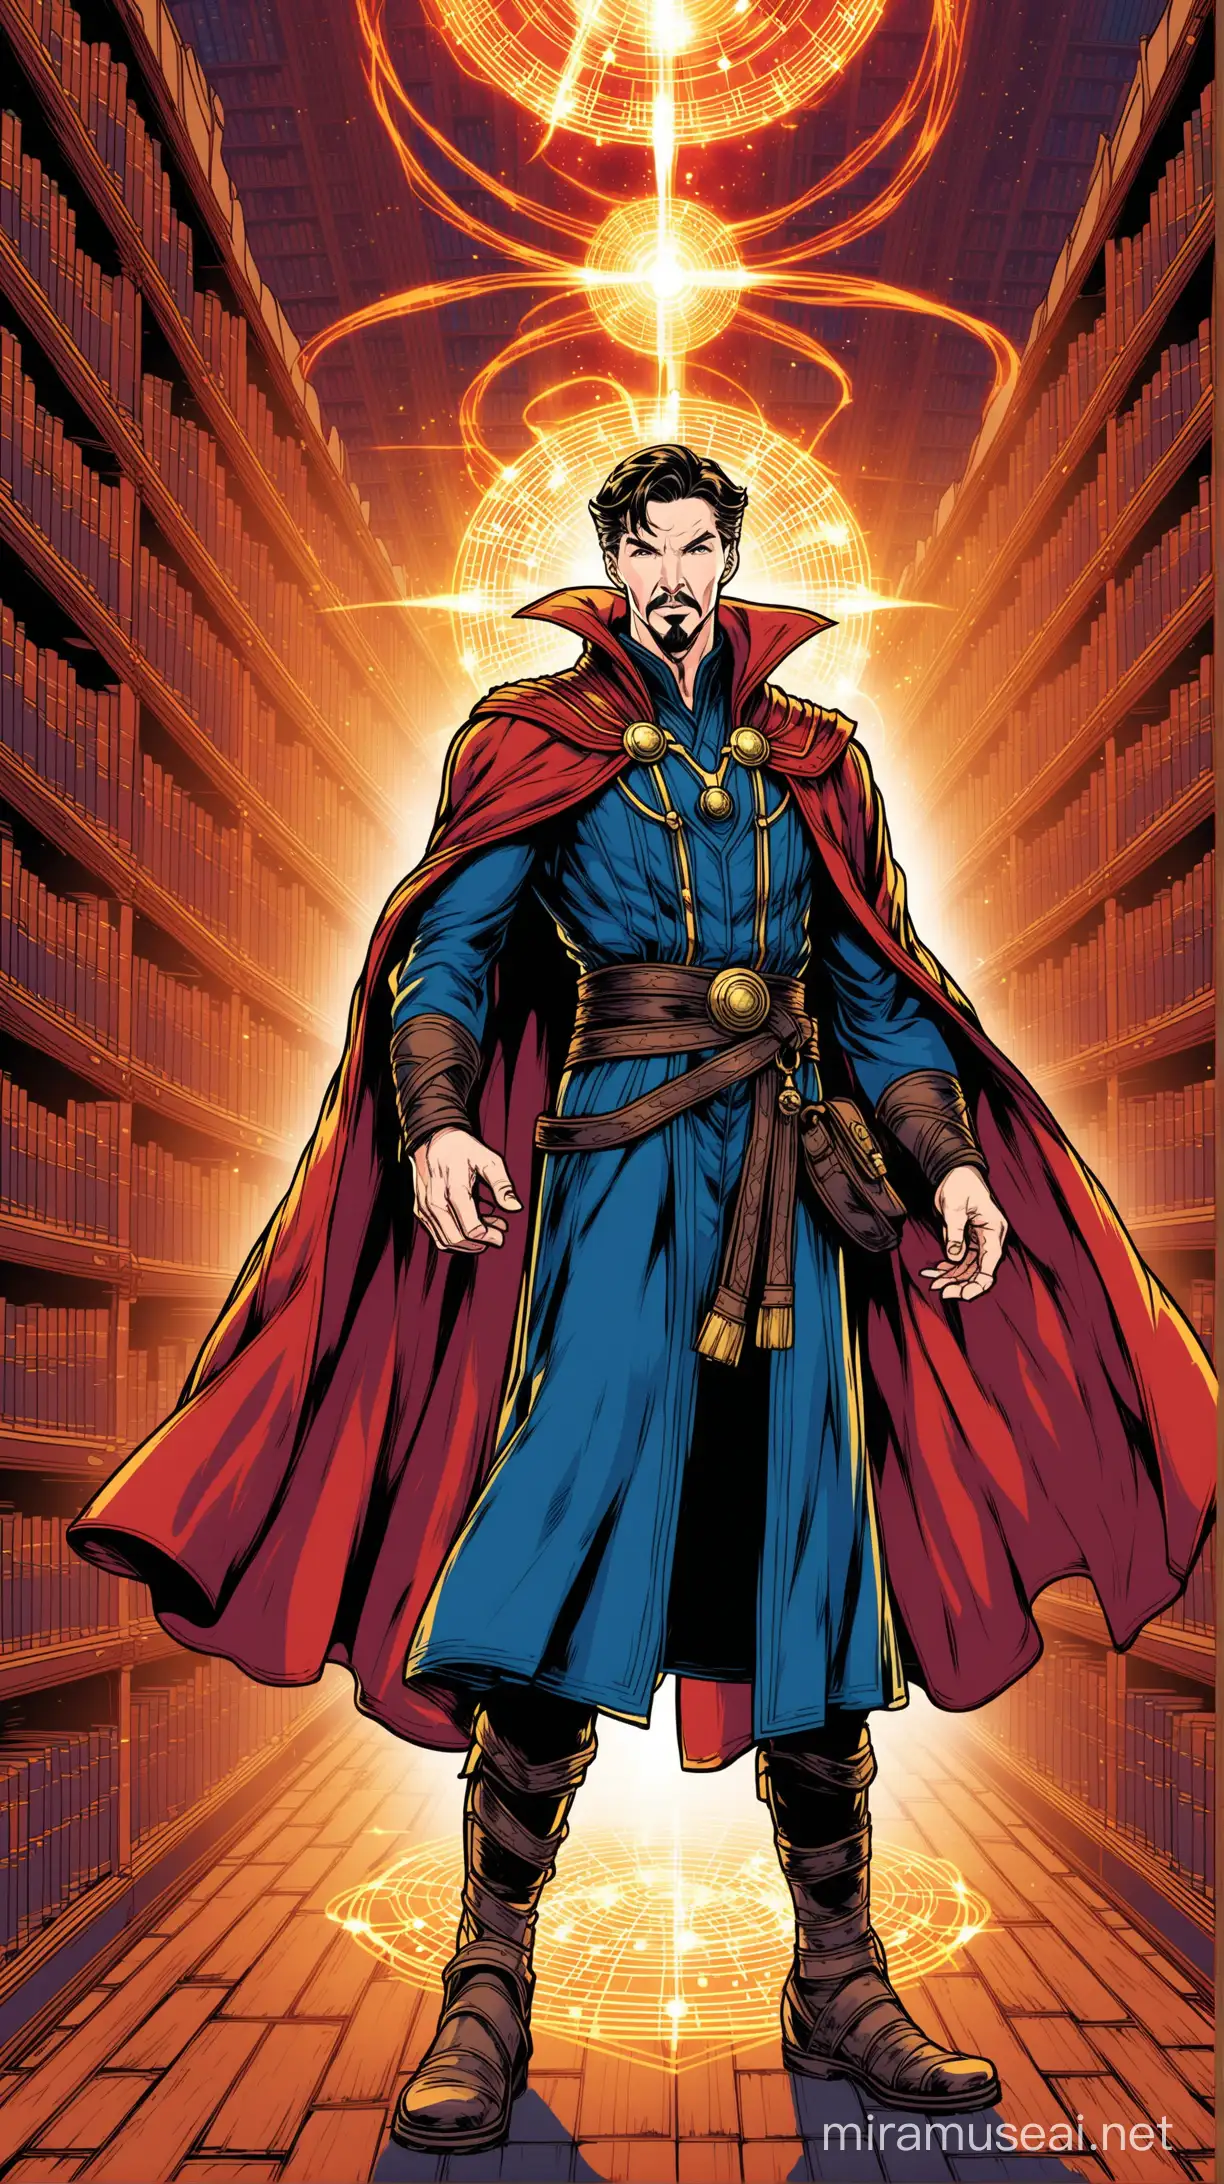 Doctor Strange Conjuring Magic in Library Setting